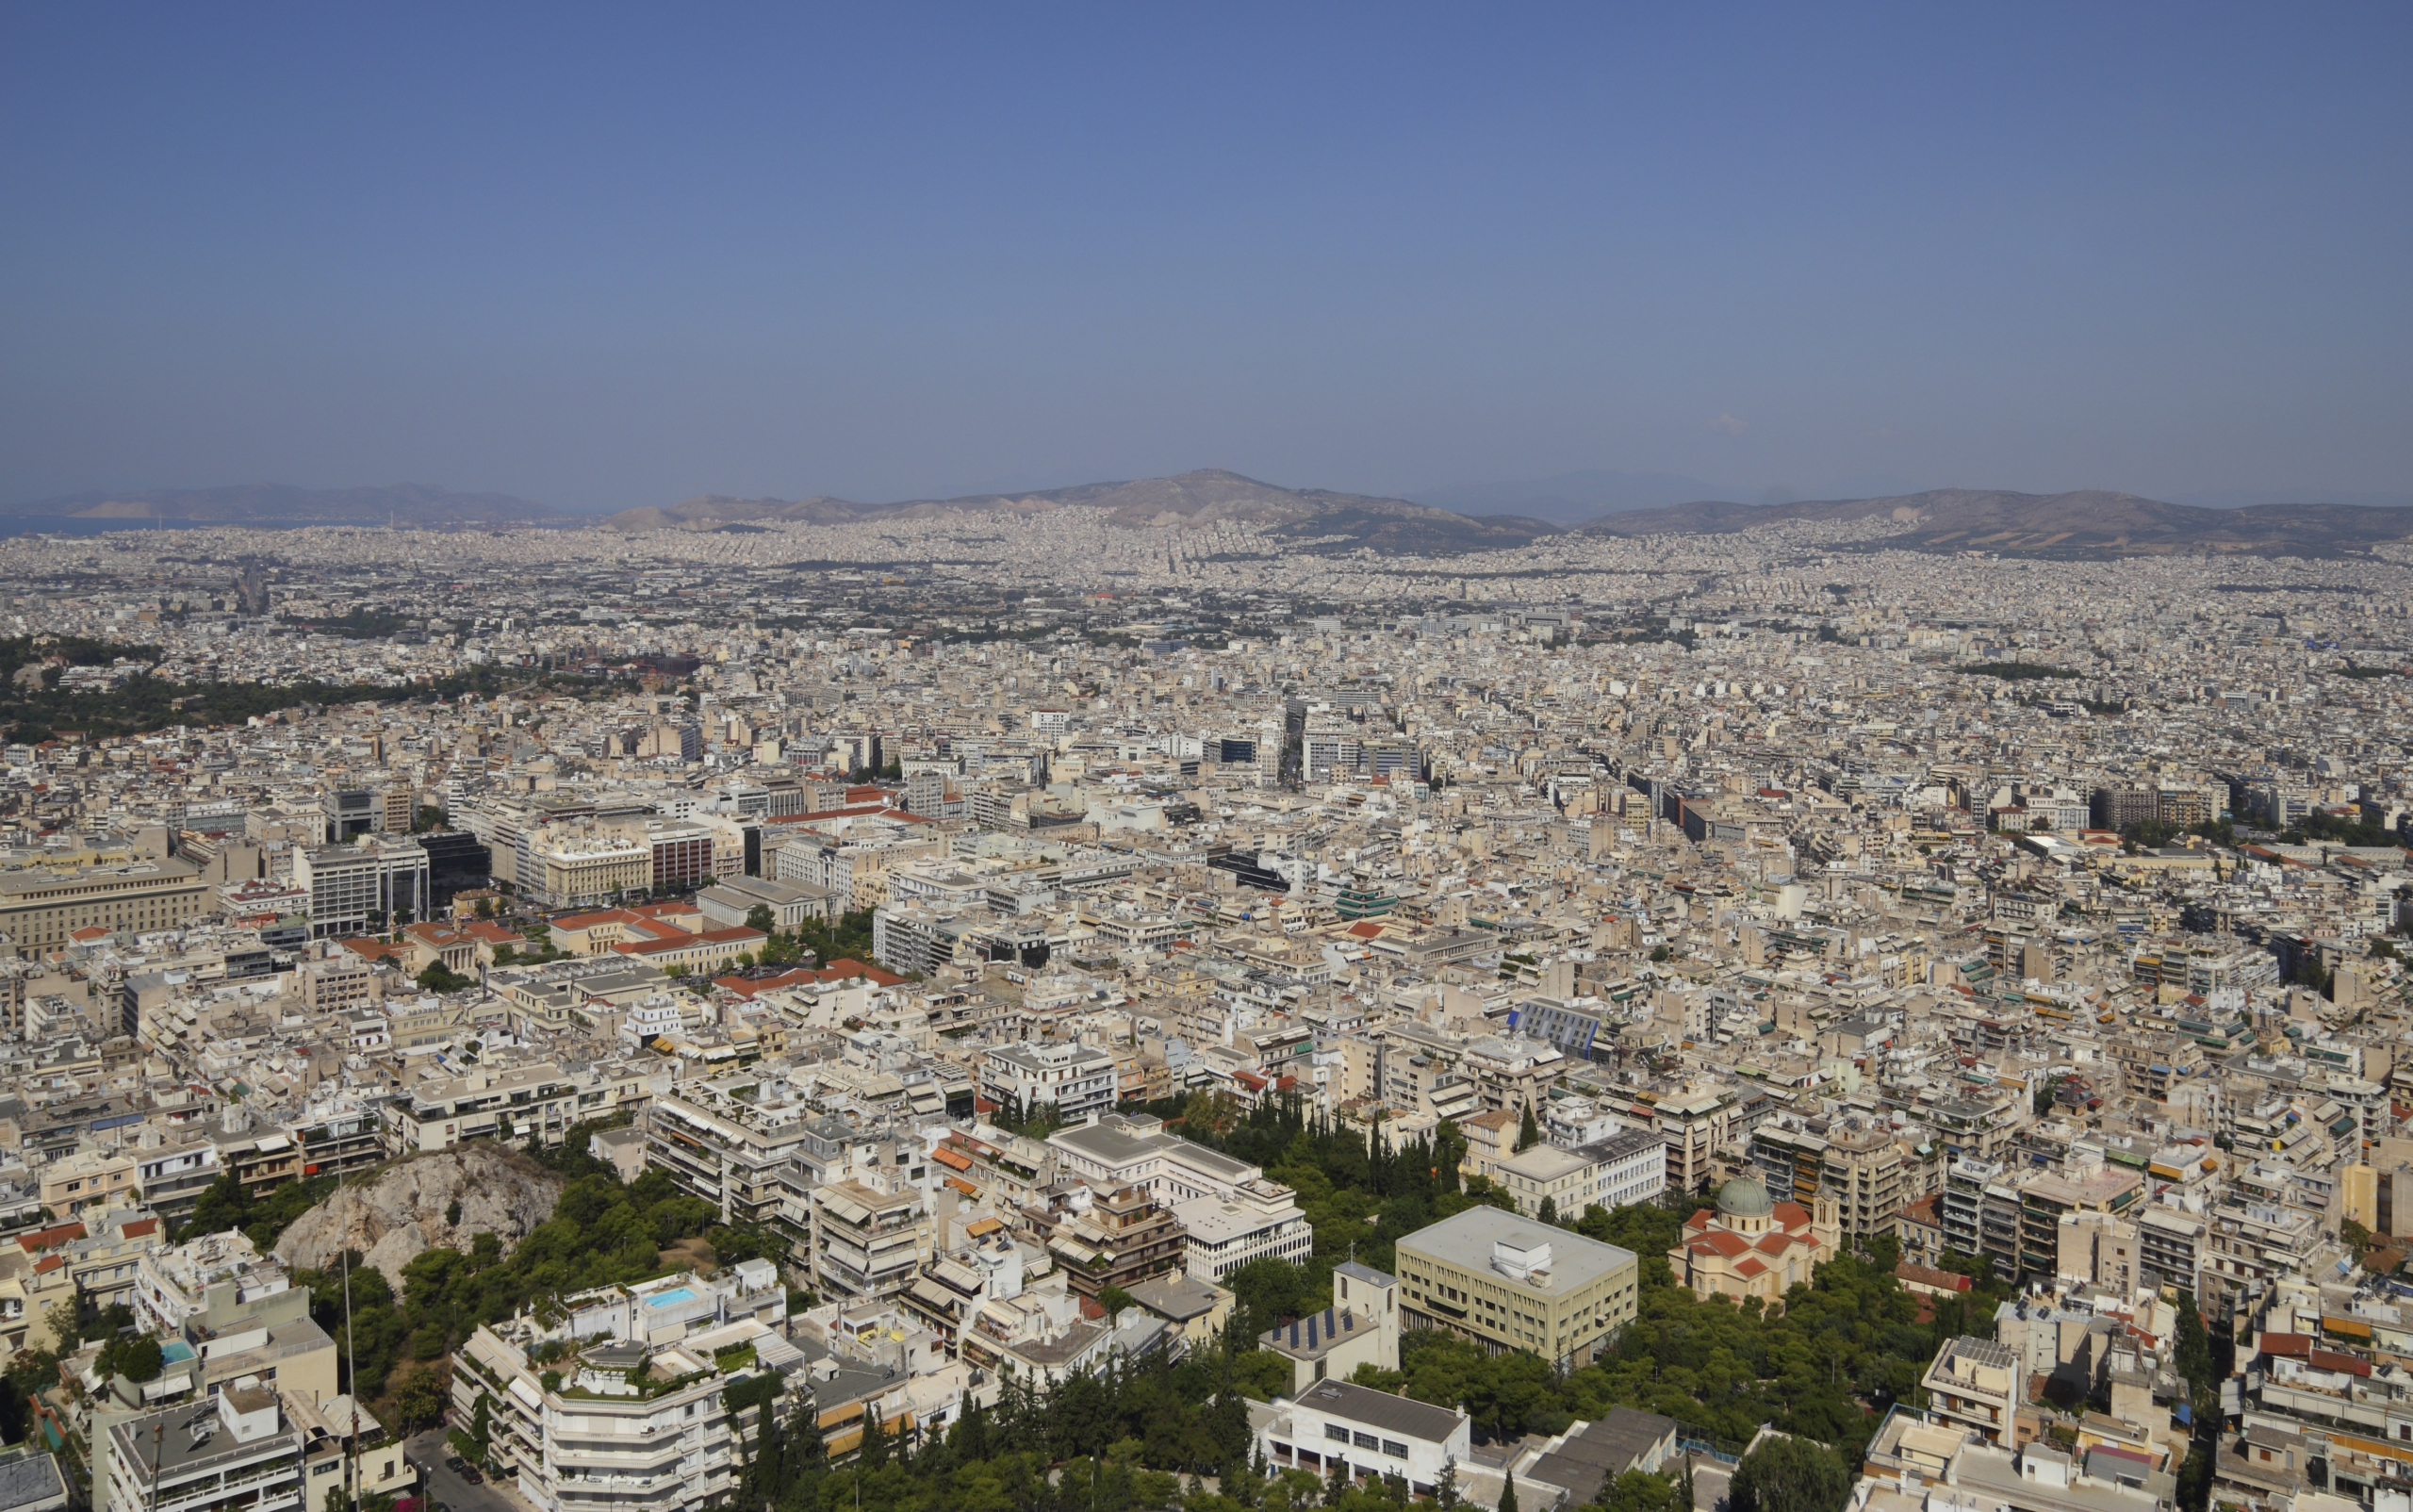 The climate crisis in Athens is exacerbated by urban planning mistakes